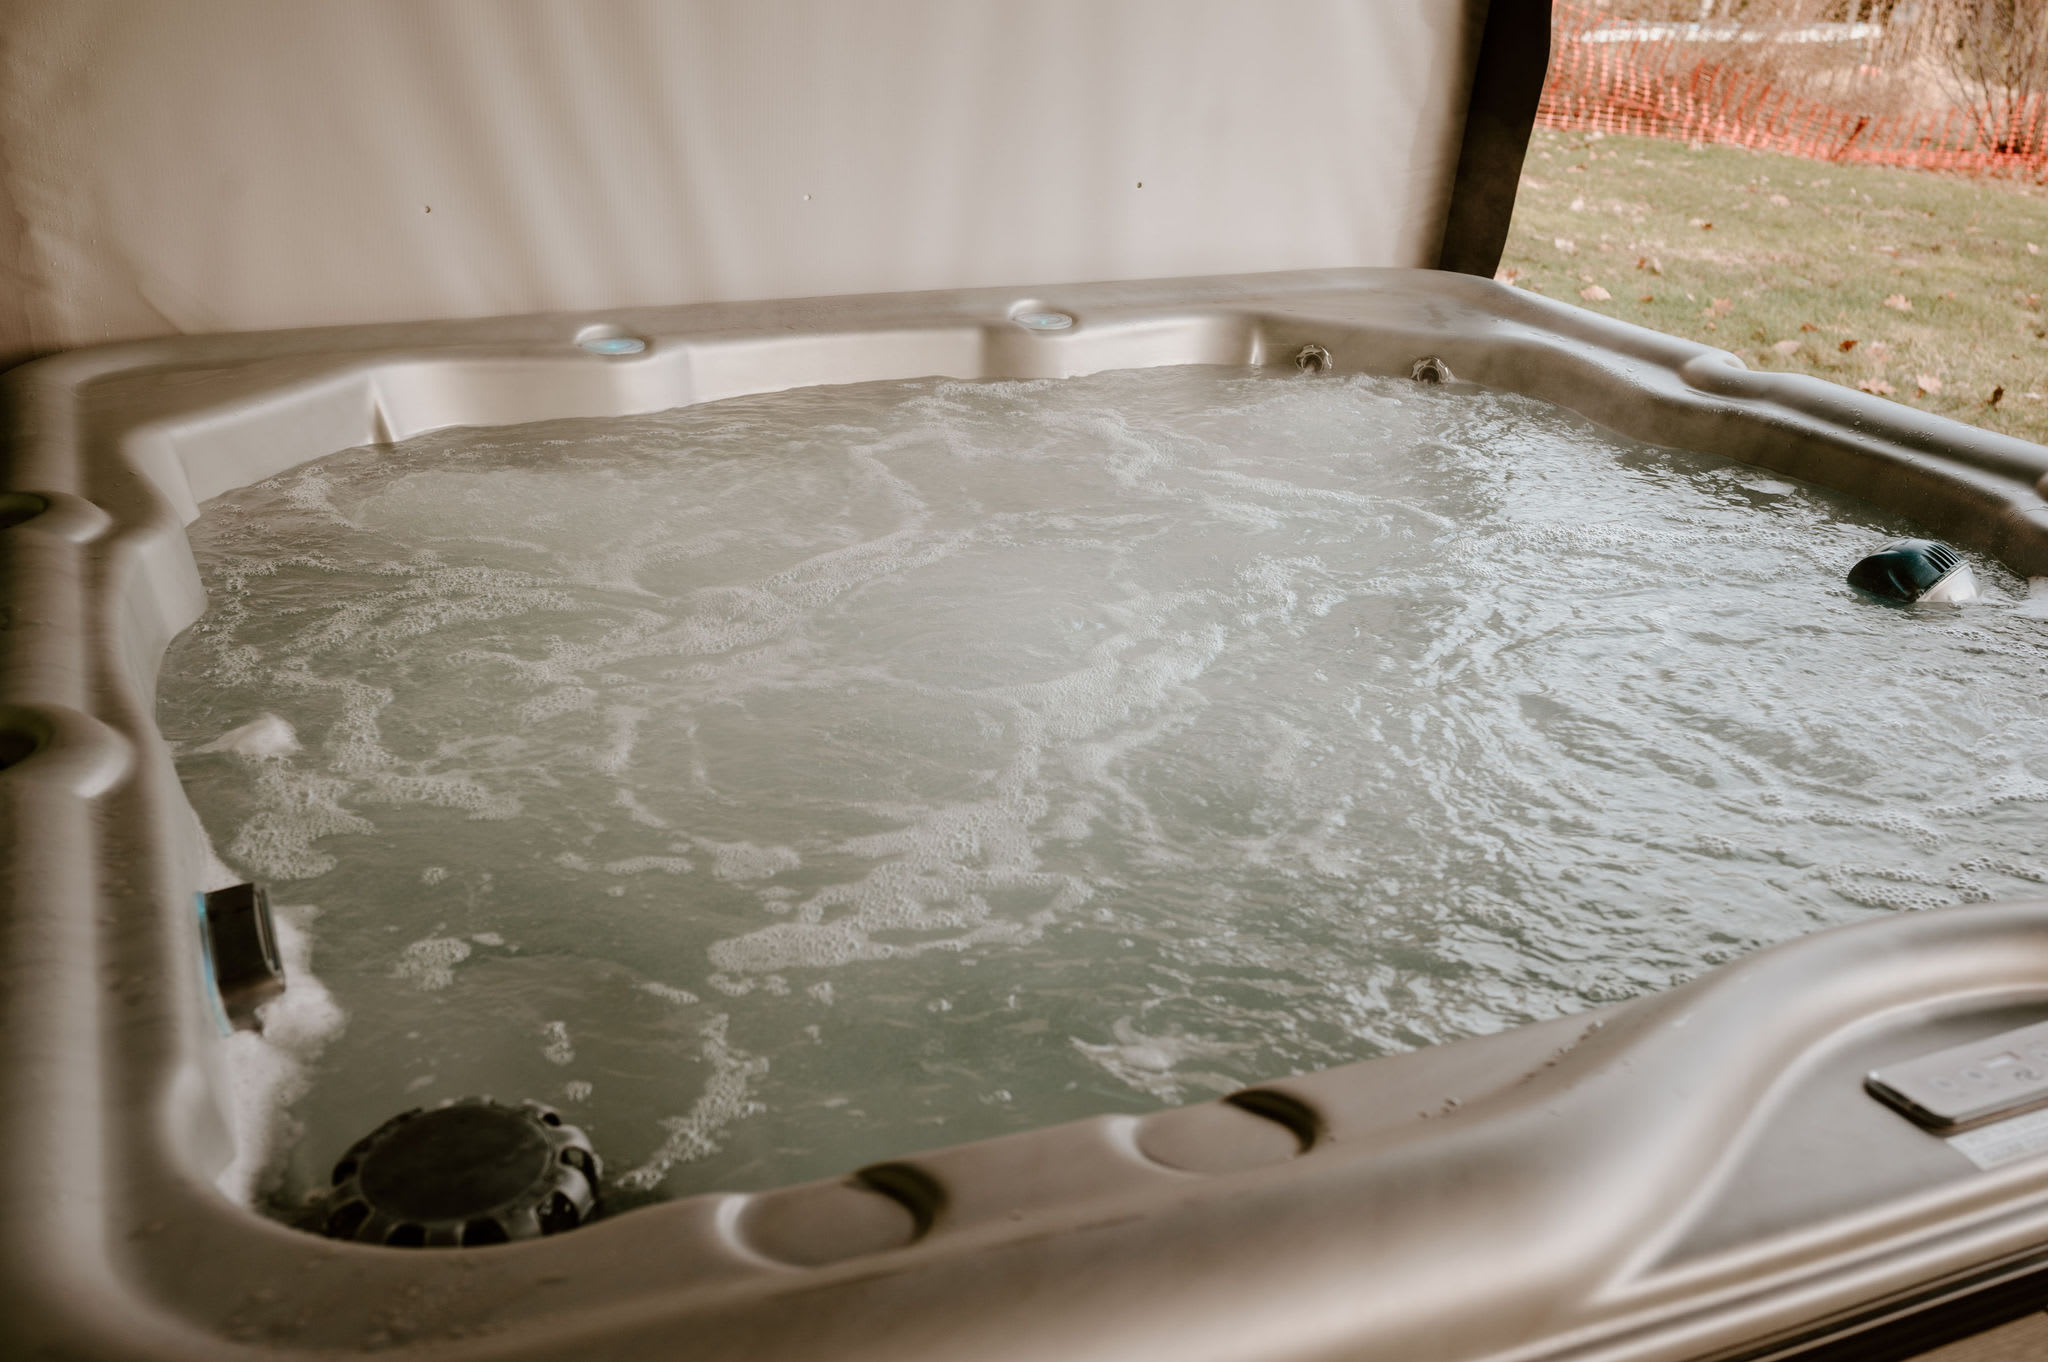 Hot Tub for 6. We keep it nice and clean on a regular maintenance schedule.